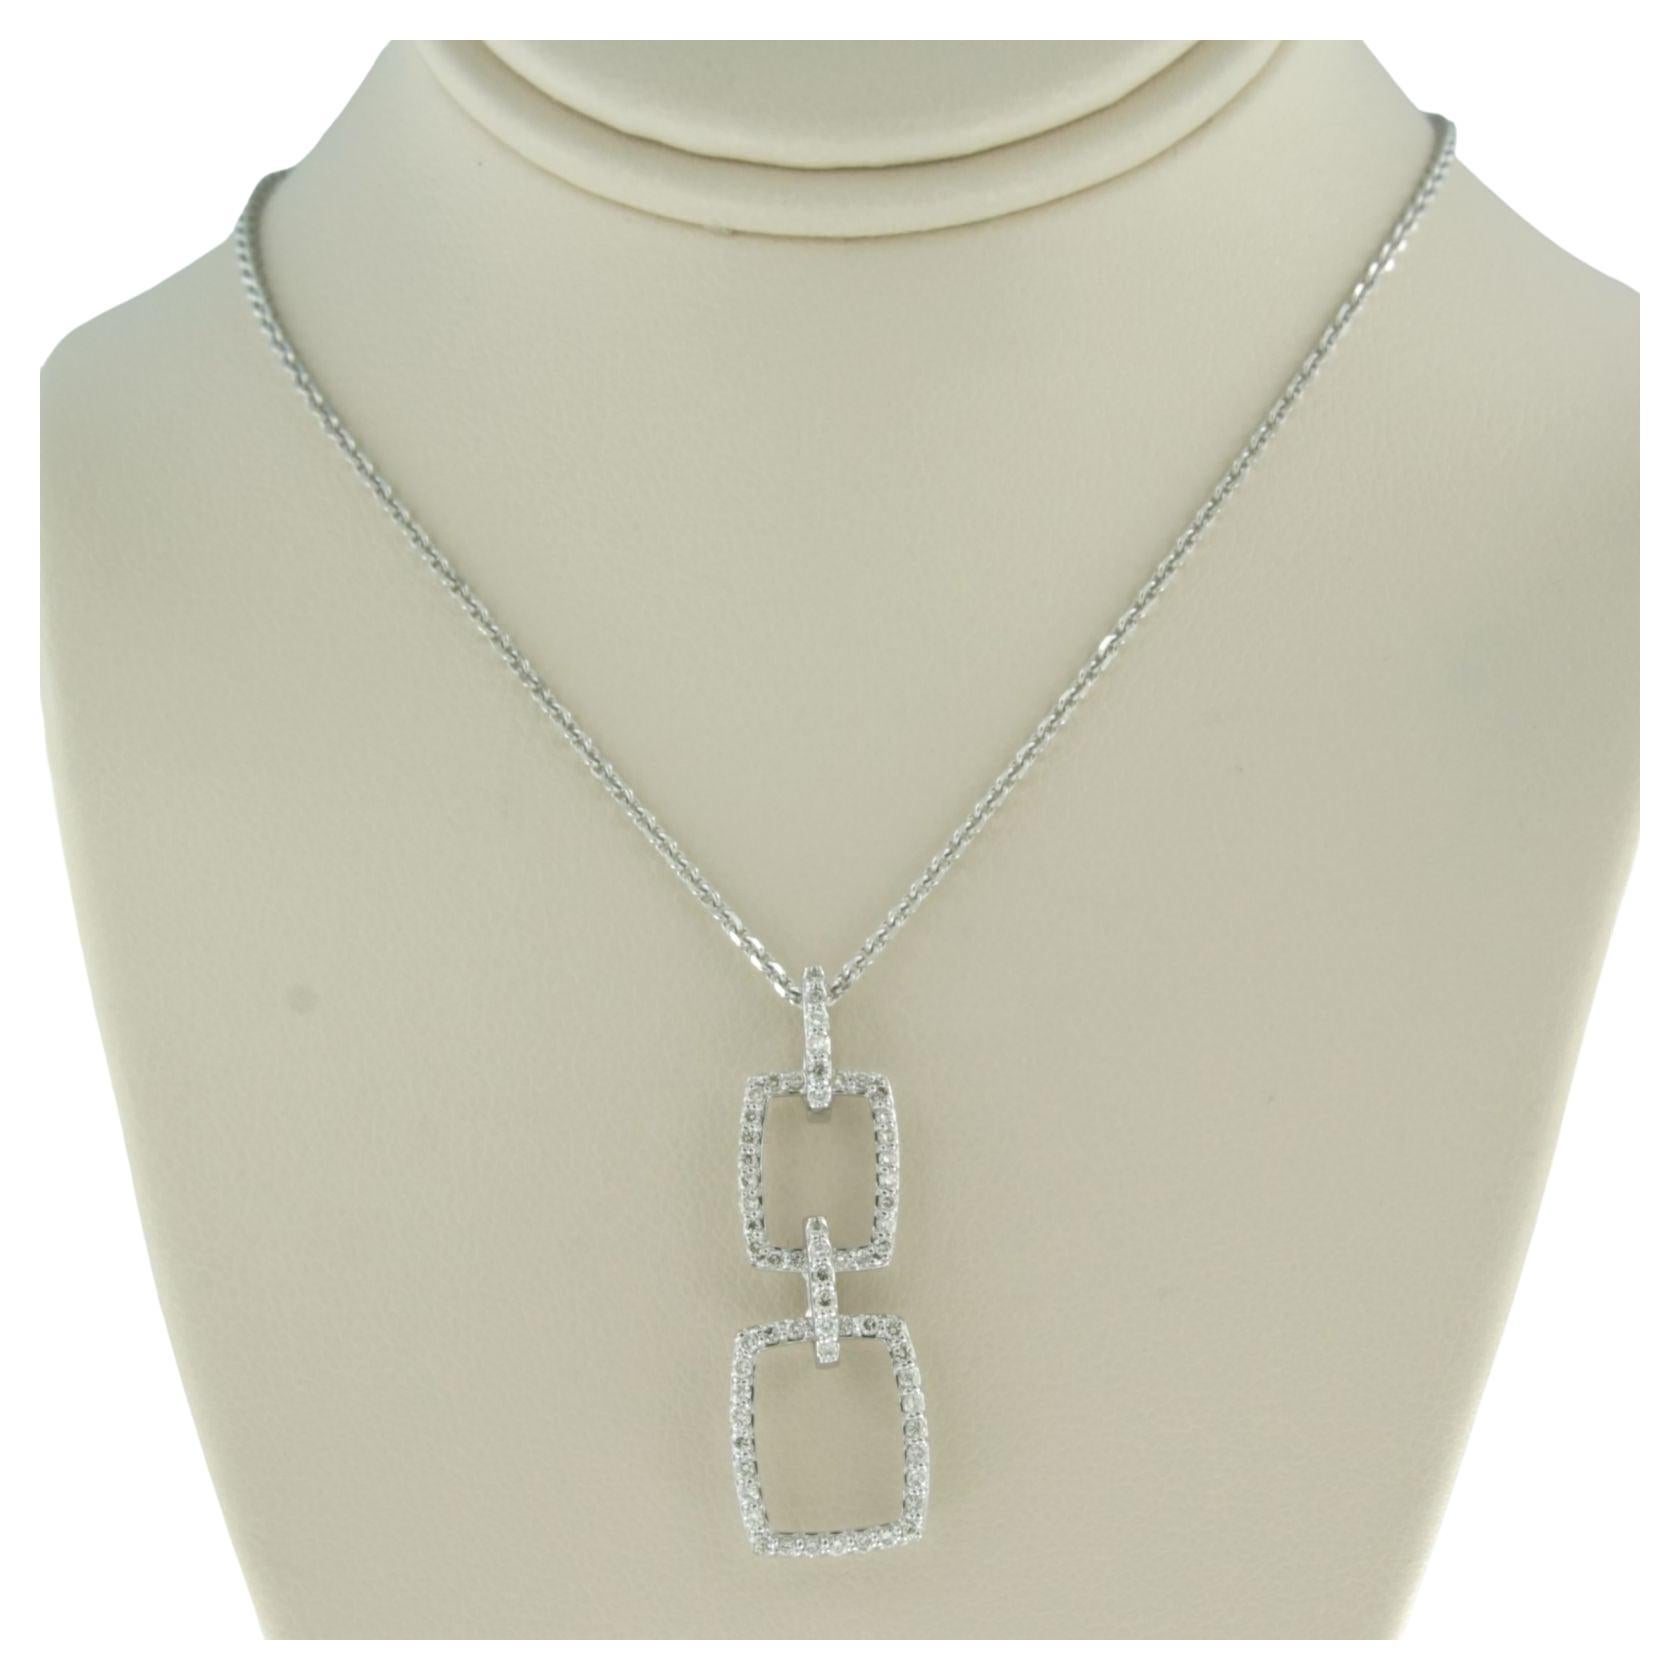 Necklace and pendant set with diamonds 18k white gold 40 cm long For Sale